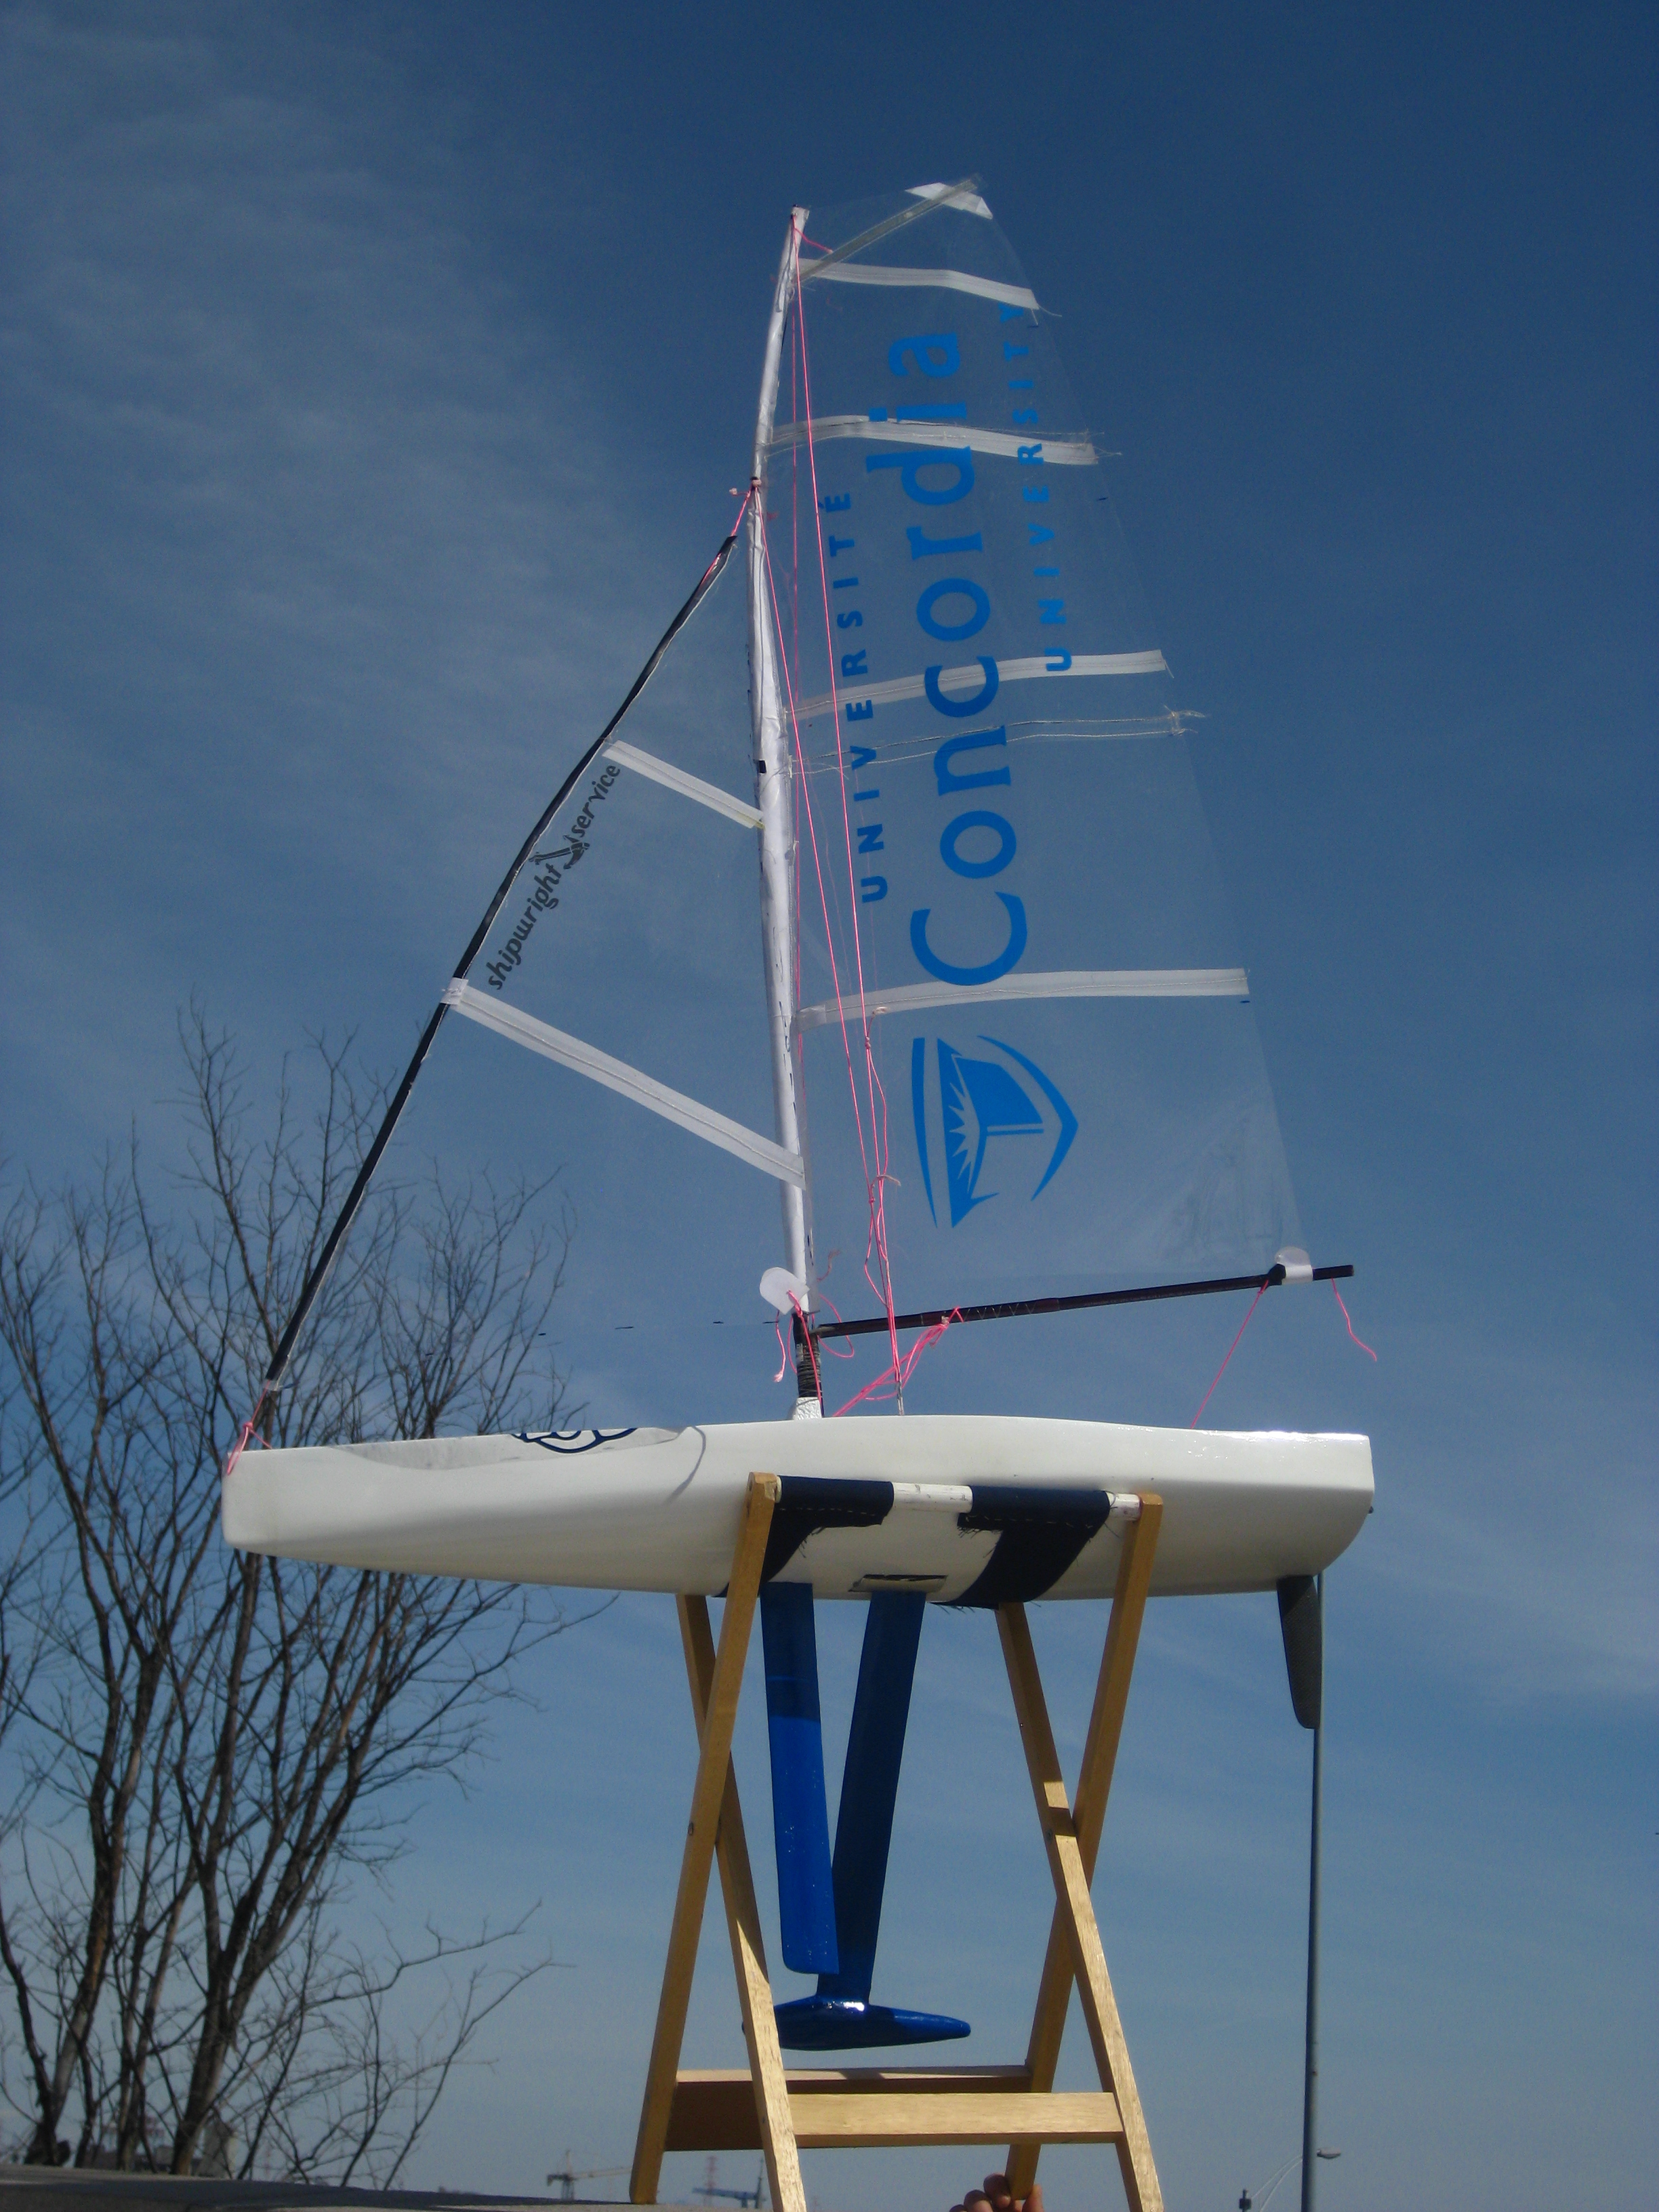 Canting Keel Remote Control Sailboat — model based on Volvo Ocean 